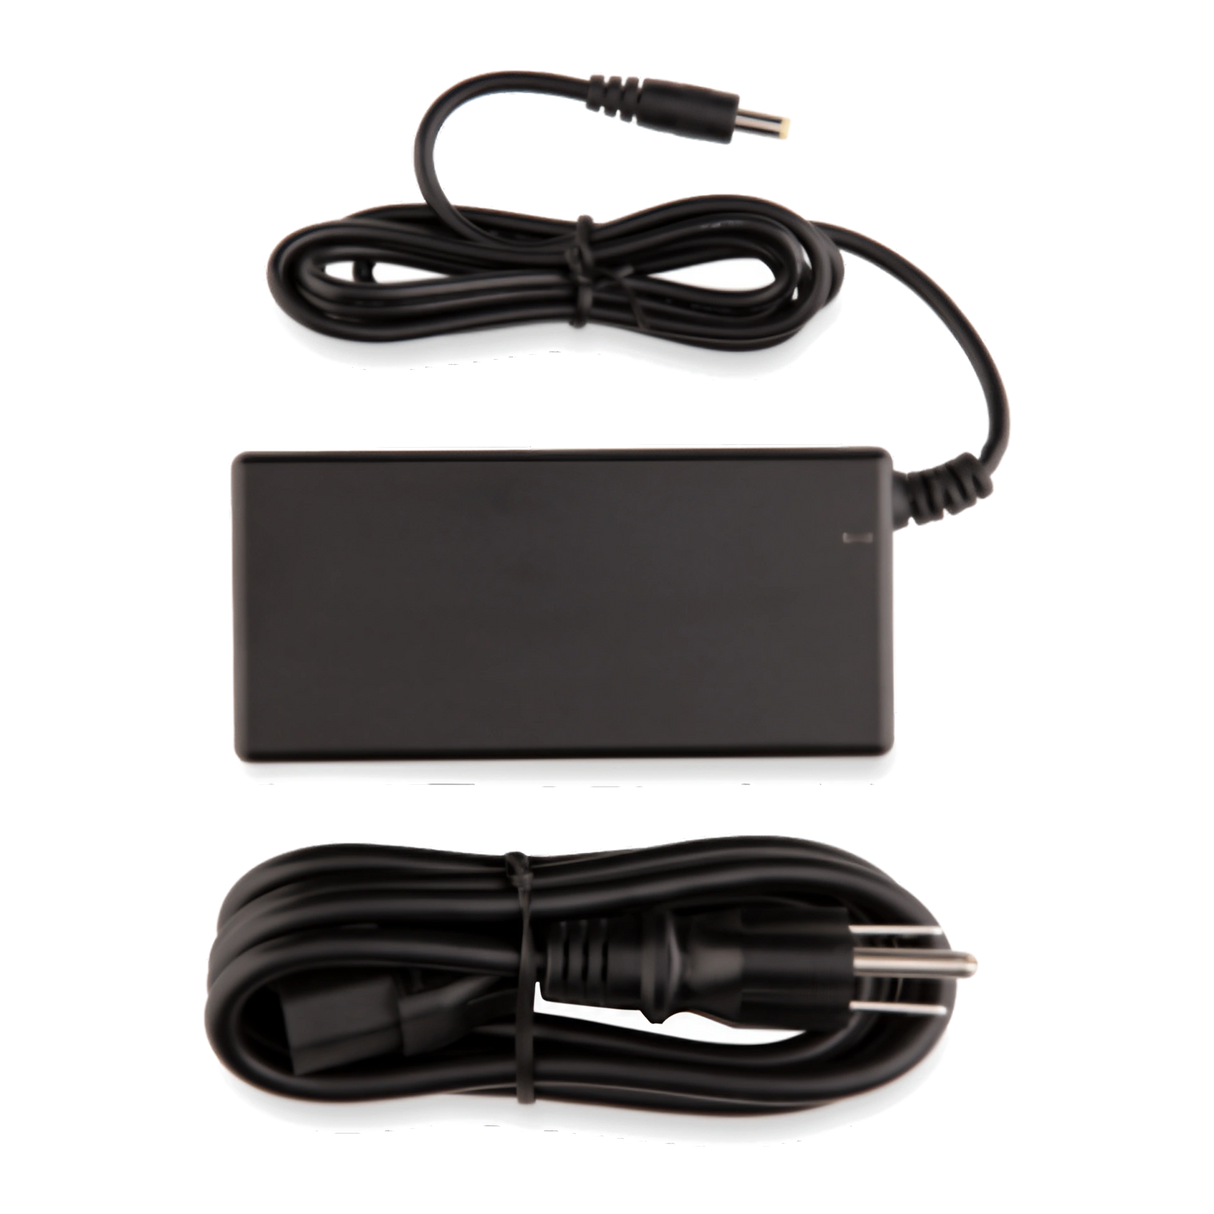 Arizer Solo Power Adapter in black, portable design for vaporizers, plug-in type, Canadian made